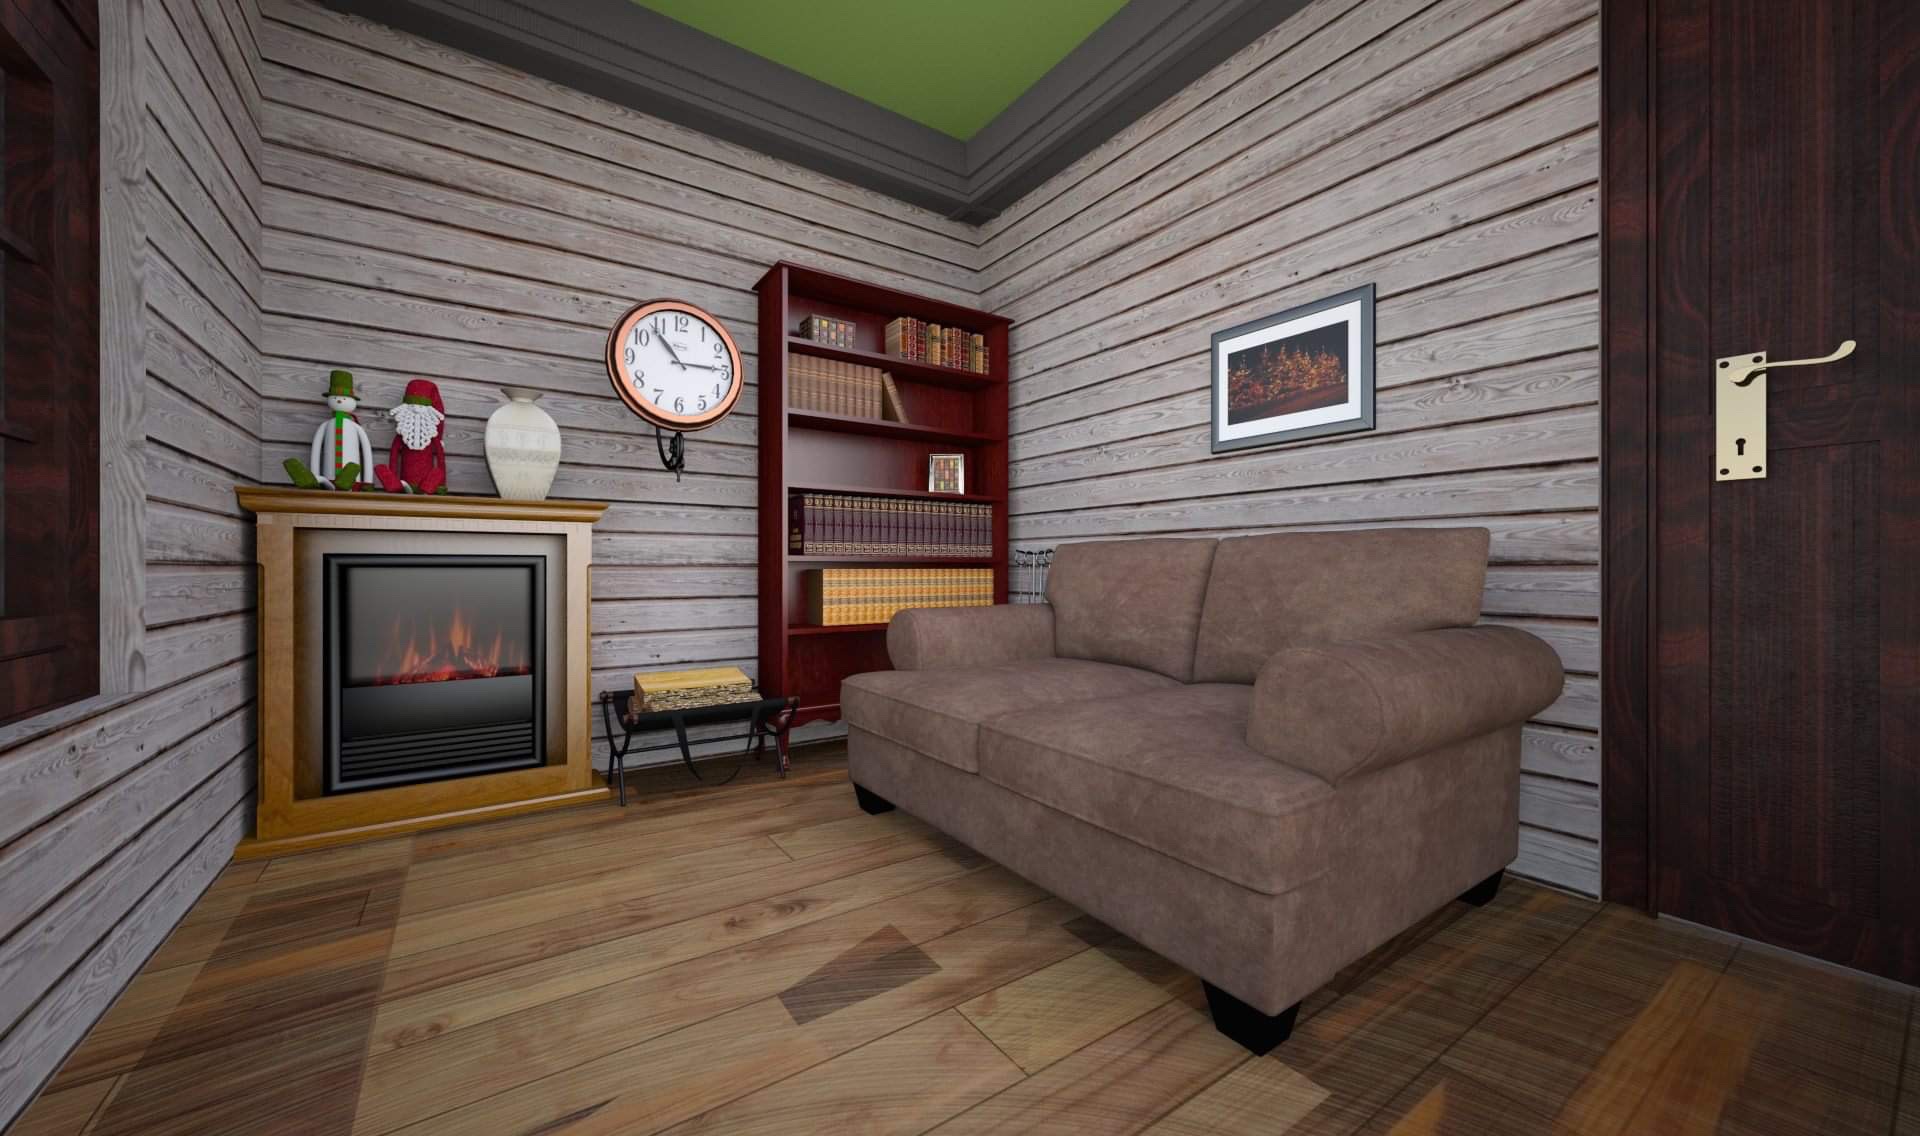 INT. WOODEN HOME LIVING ROOM – NIGHT